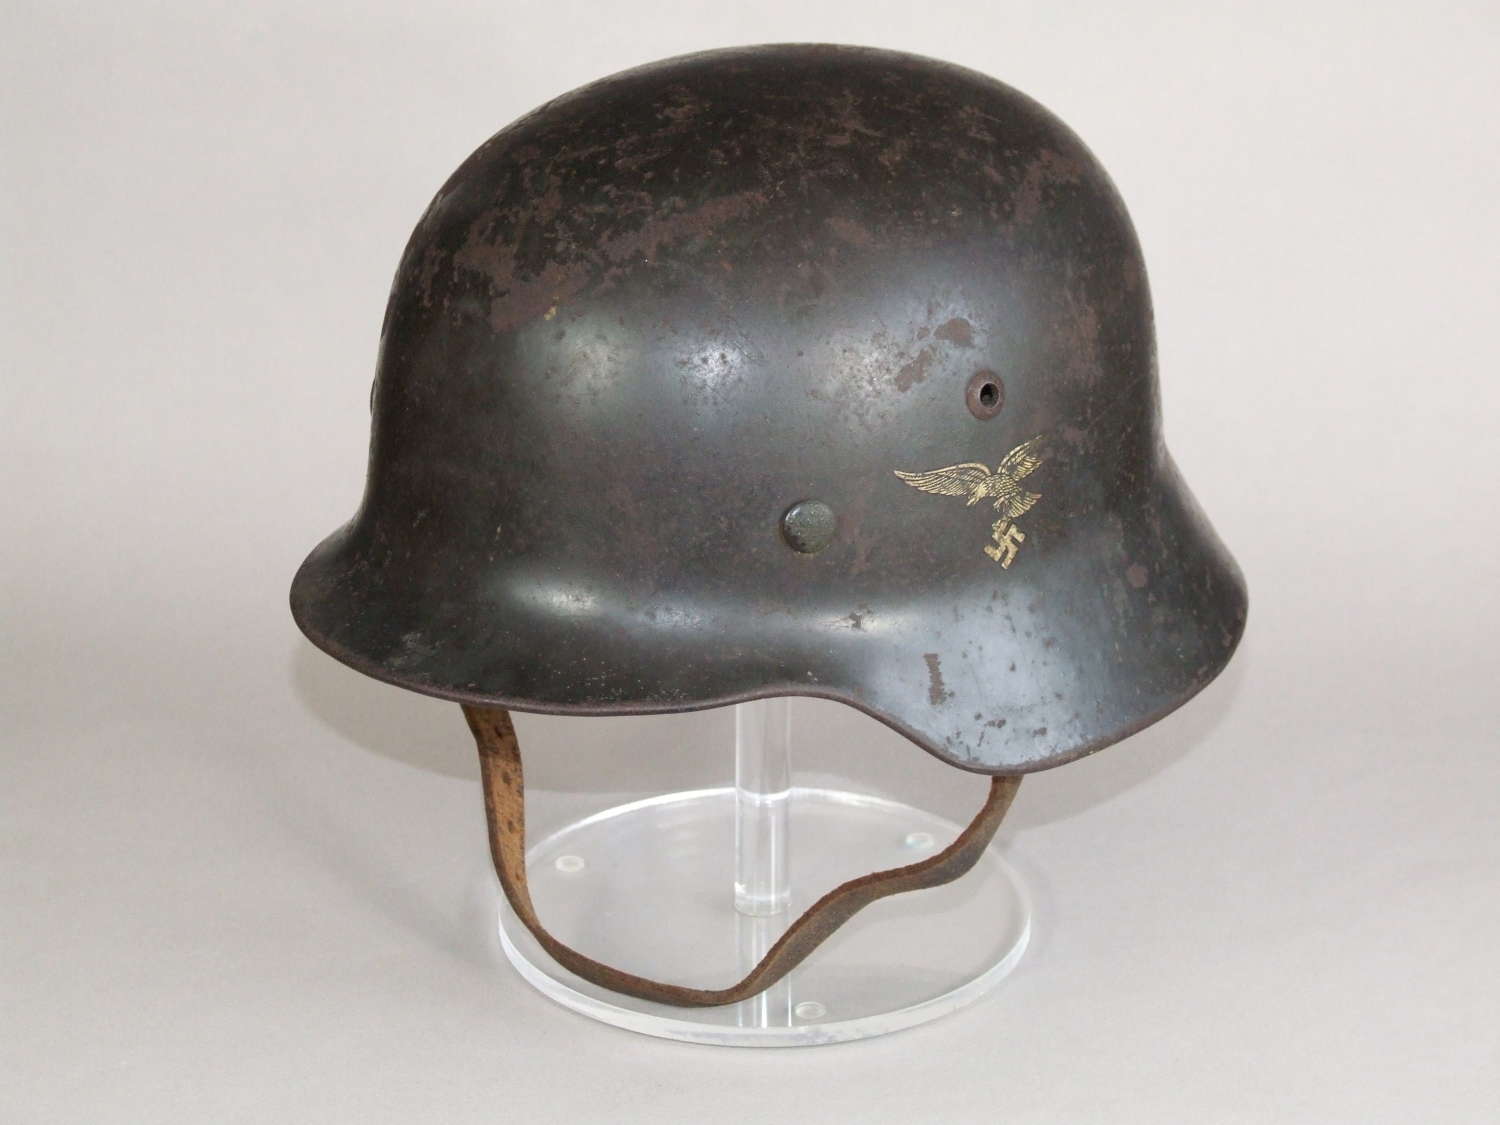 1st Pattern Luftwaffe Double Decal Helmet with Unit Markings